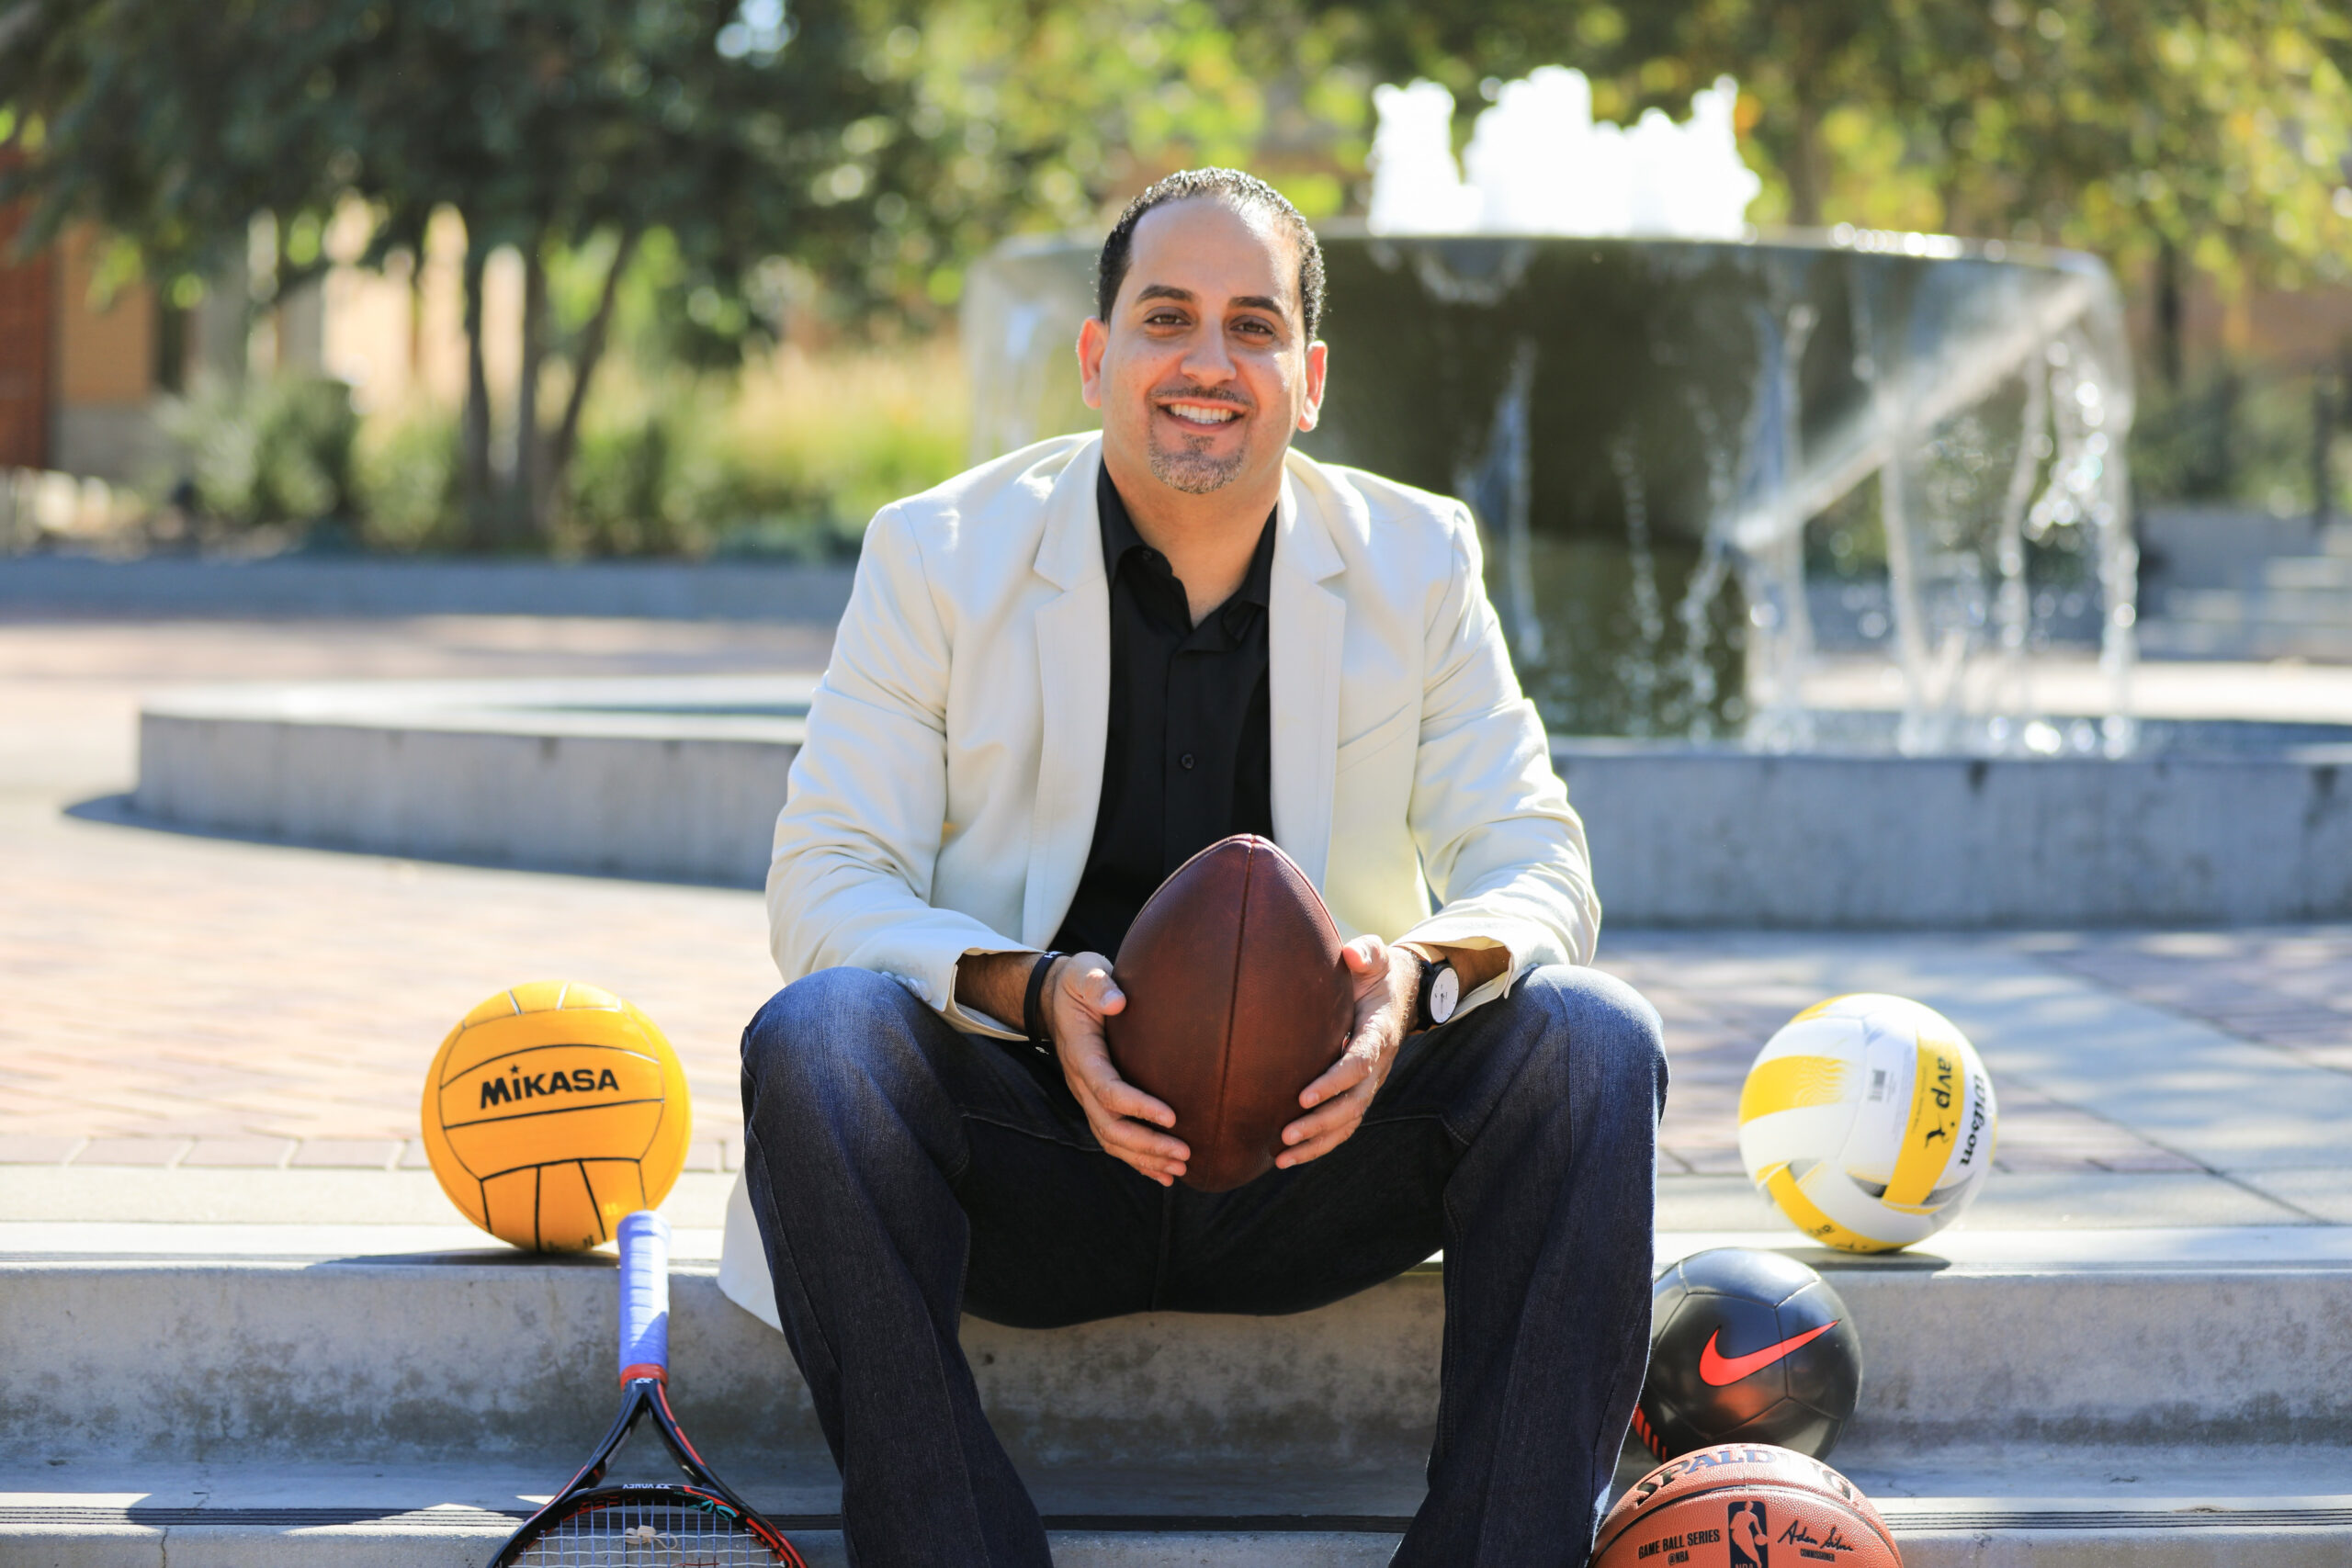 Drew Marcos in front of a fountain gripping a football and surrounded by various sports equipment.